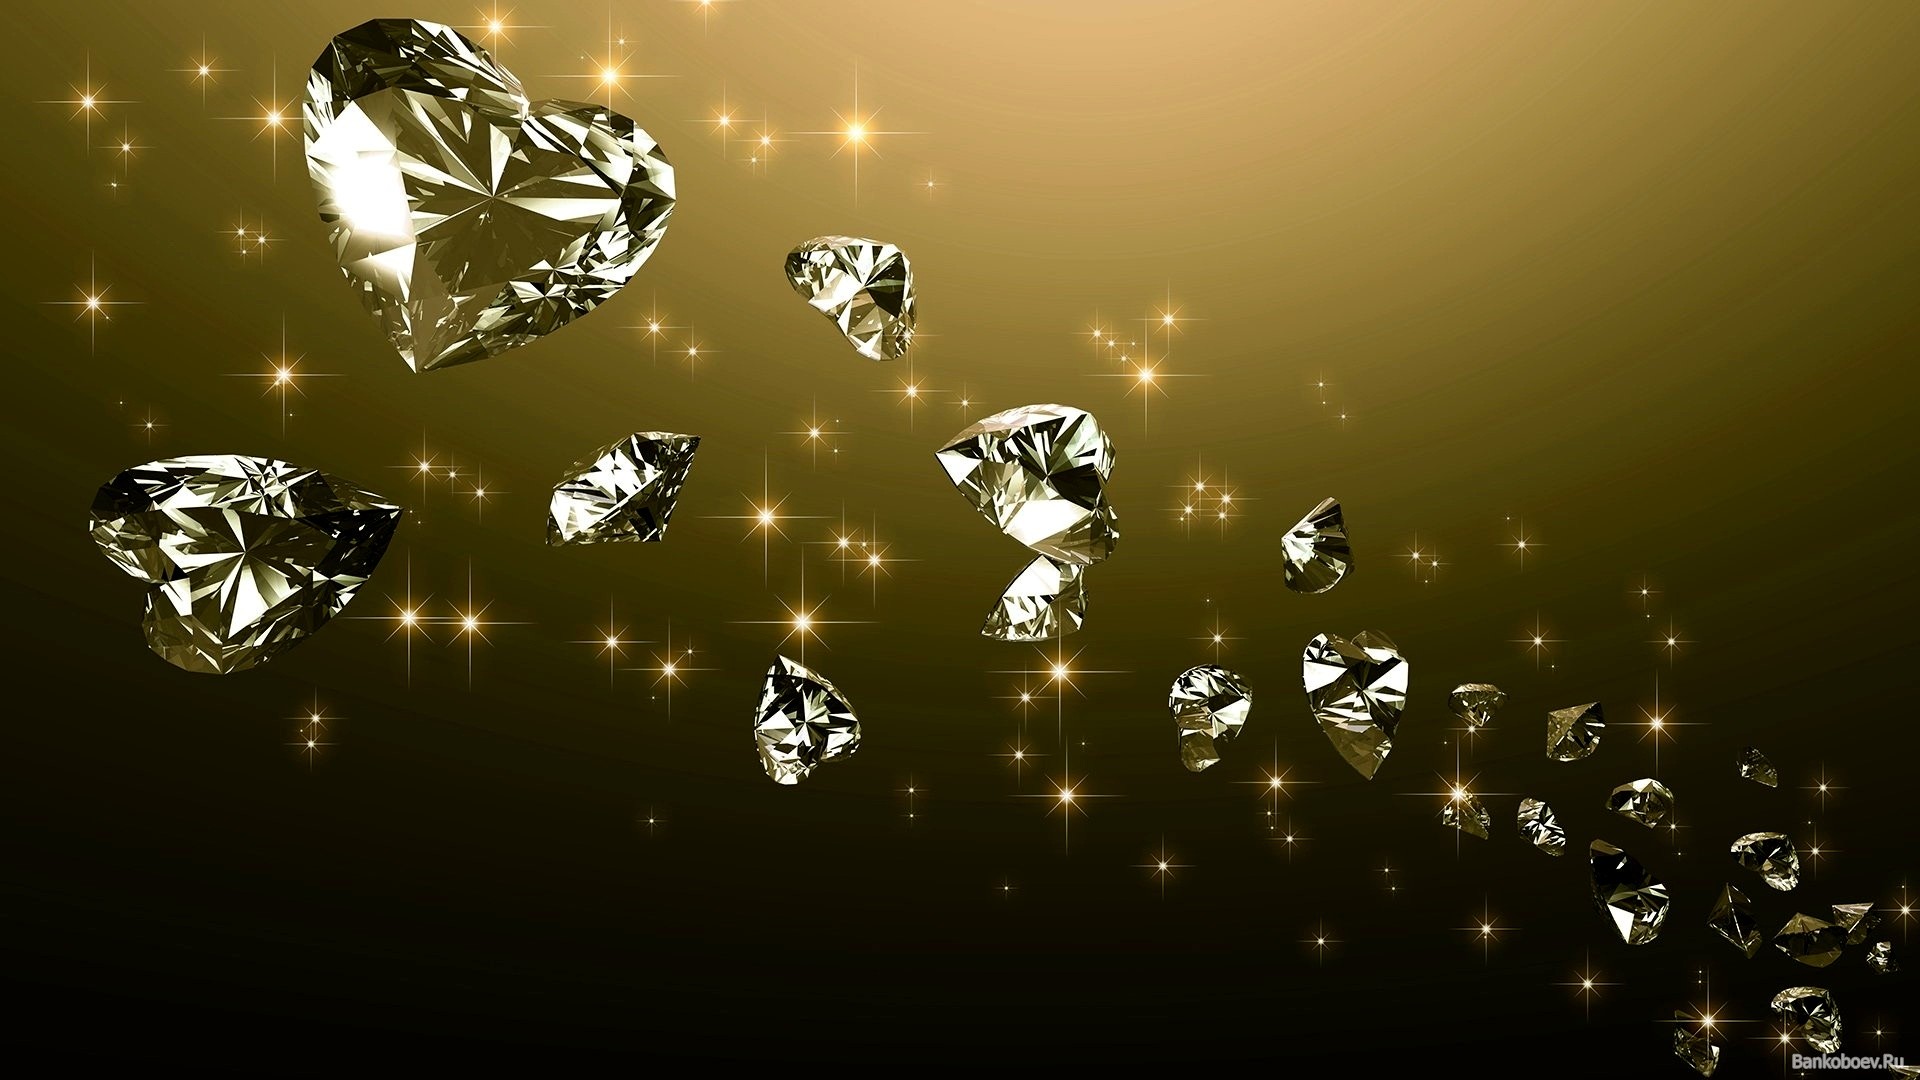 1920x1080 Diamond Background Wallpaper Hd diamond wallpapers hd pictures one hd #10291